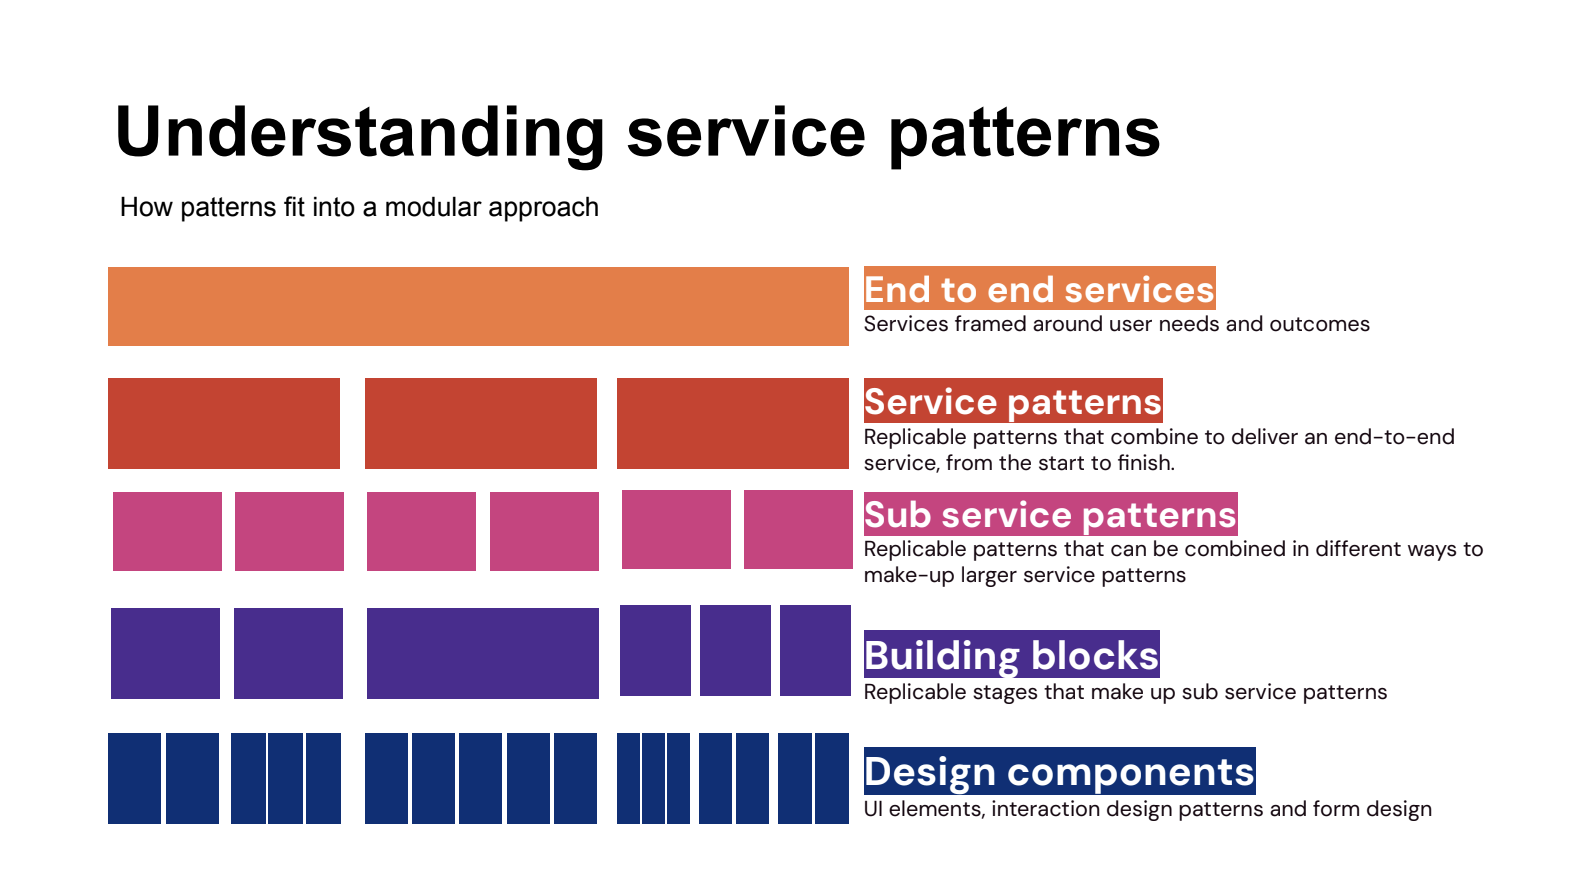 The taxonomy we used to map service stages and components with DWP